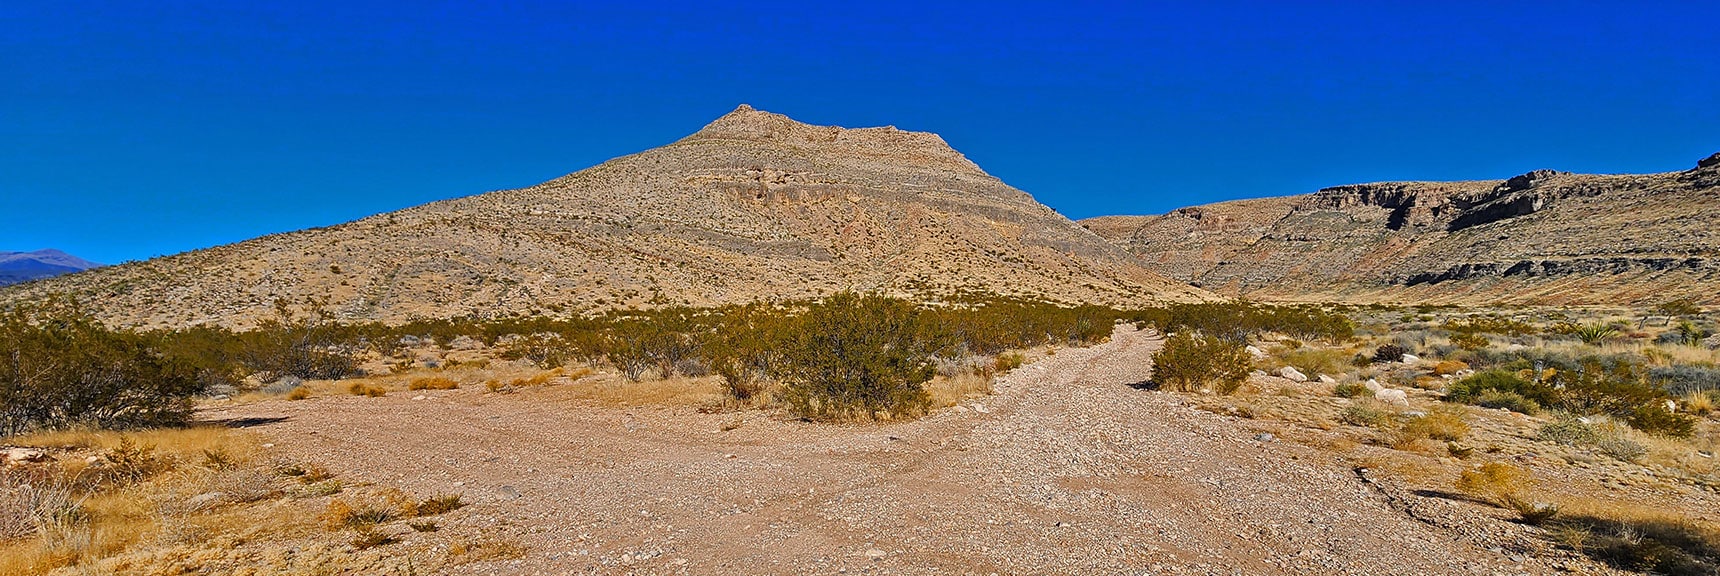 Right Divide into Mule Spring Canyon. Left Divide to CC Spring Rd. | Landmark Bluff Circuit | Lovell Canyon, Nevada